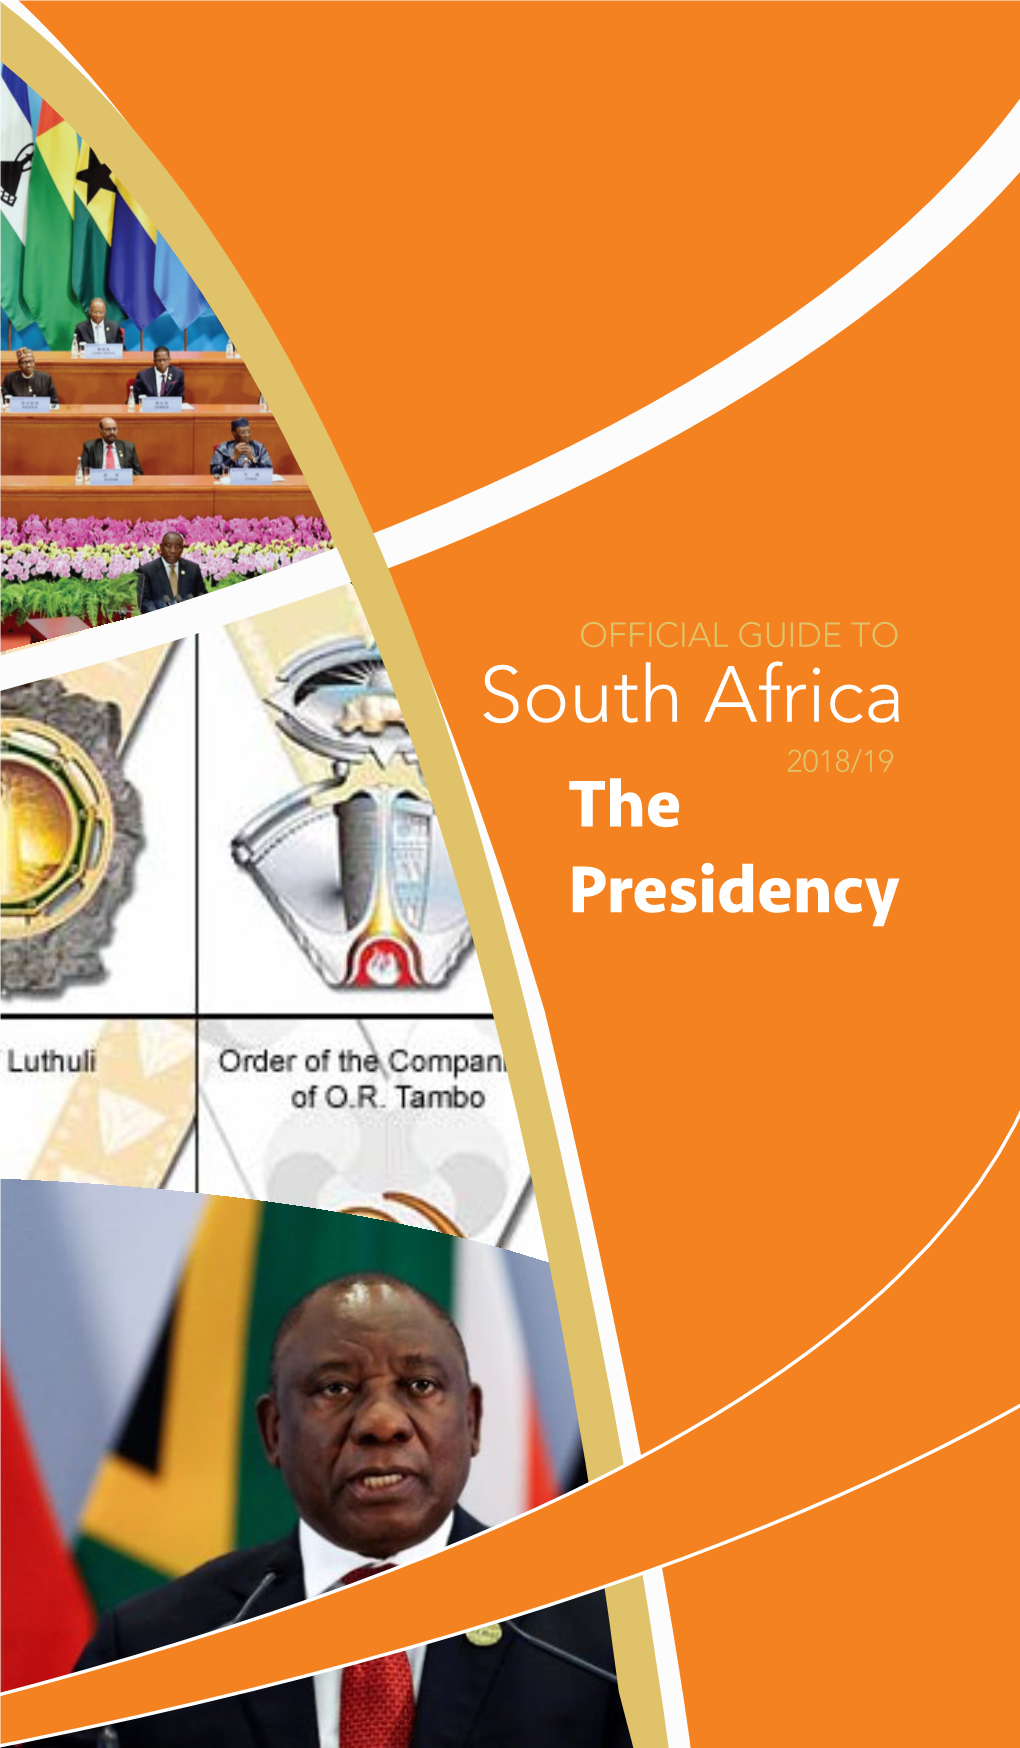 South Africa 2018/19 the Presidency